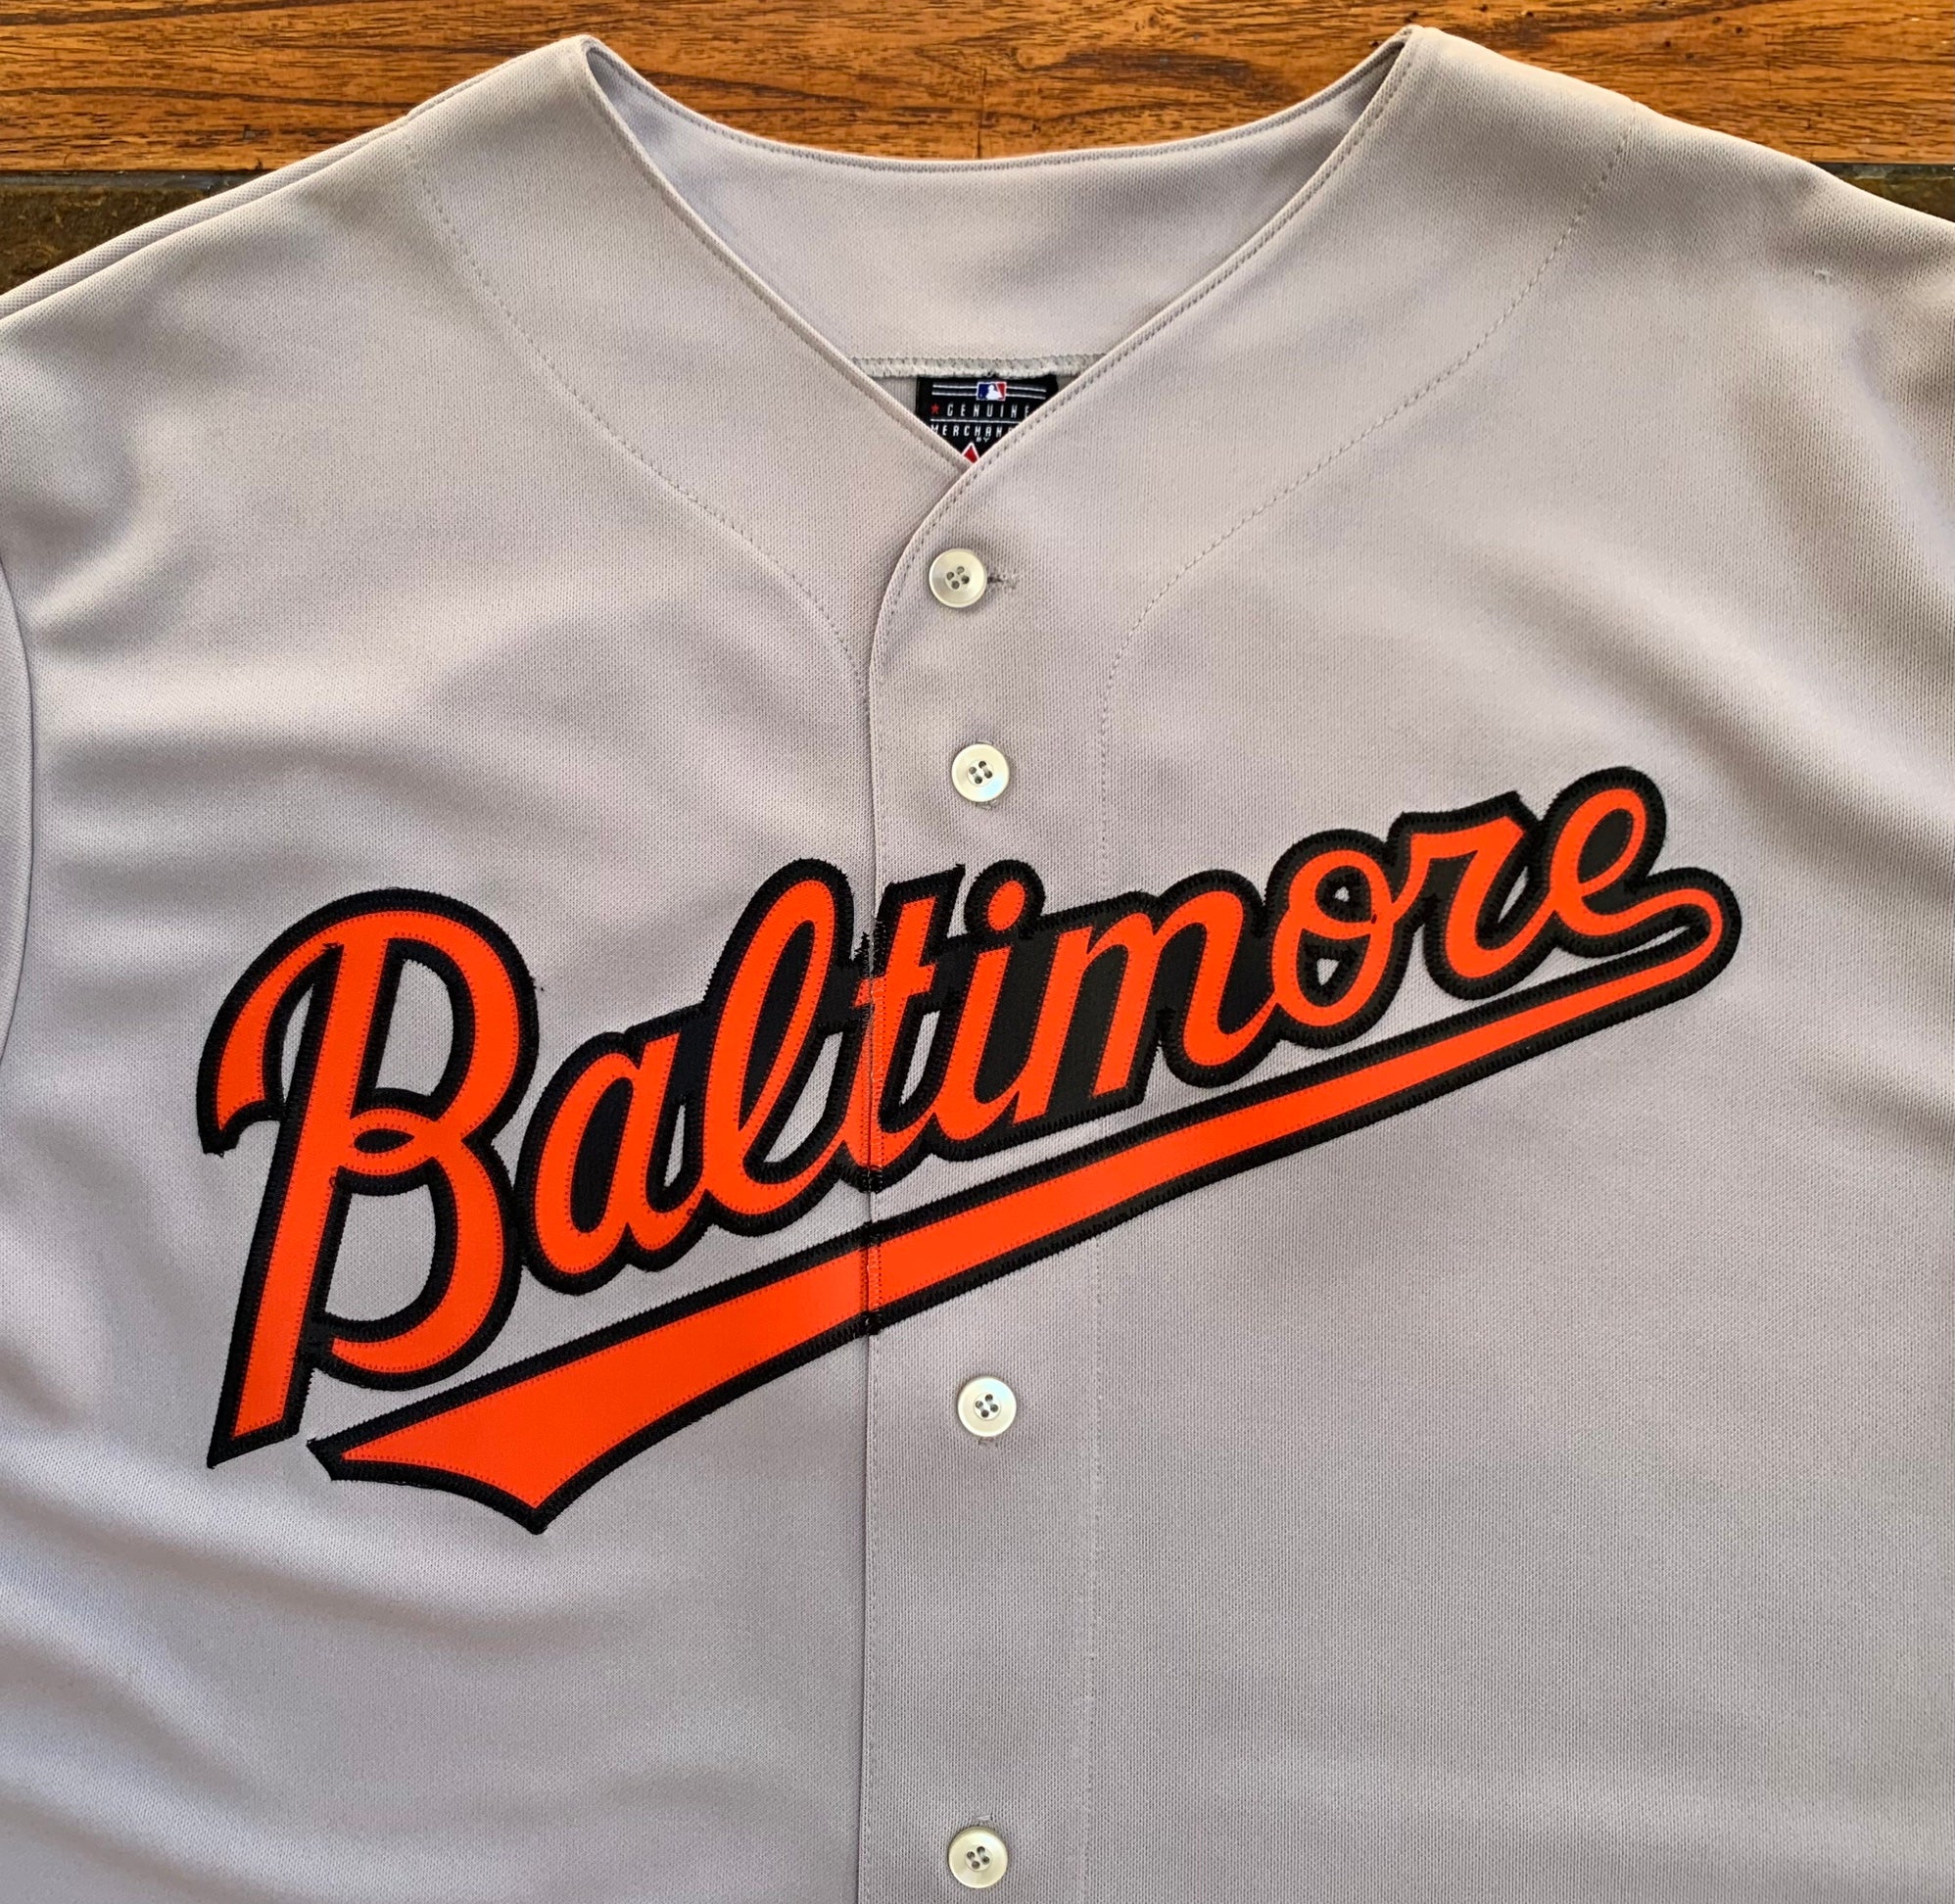 New Baltimore Orioles Brian Roberts XL Majestic Game Jersey